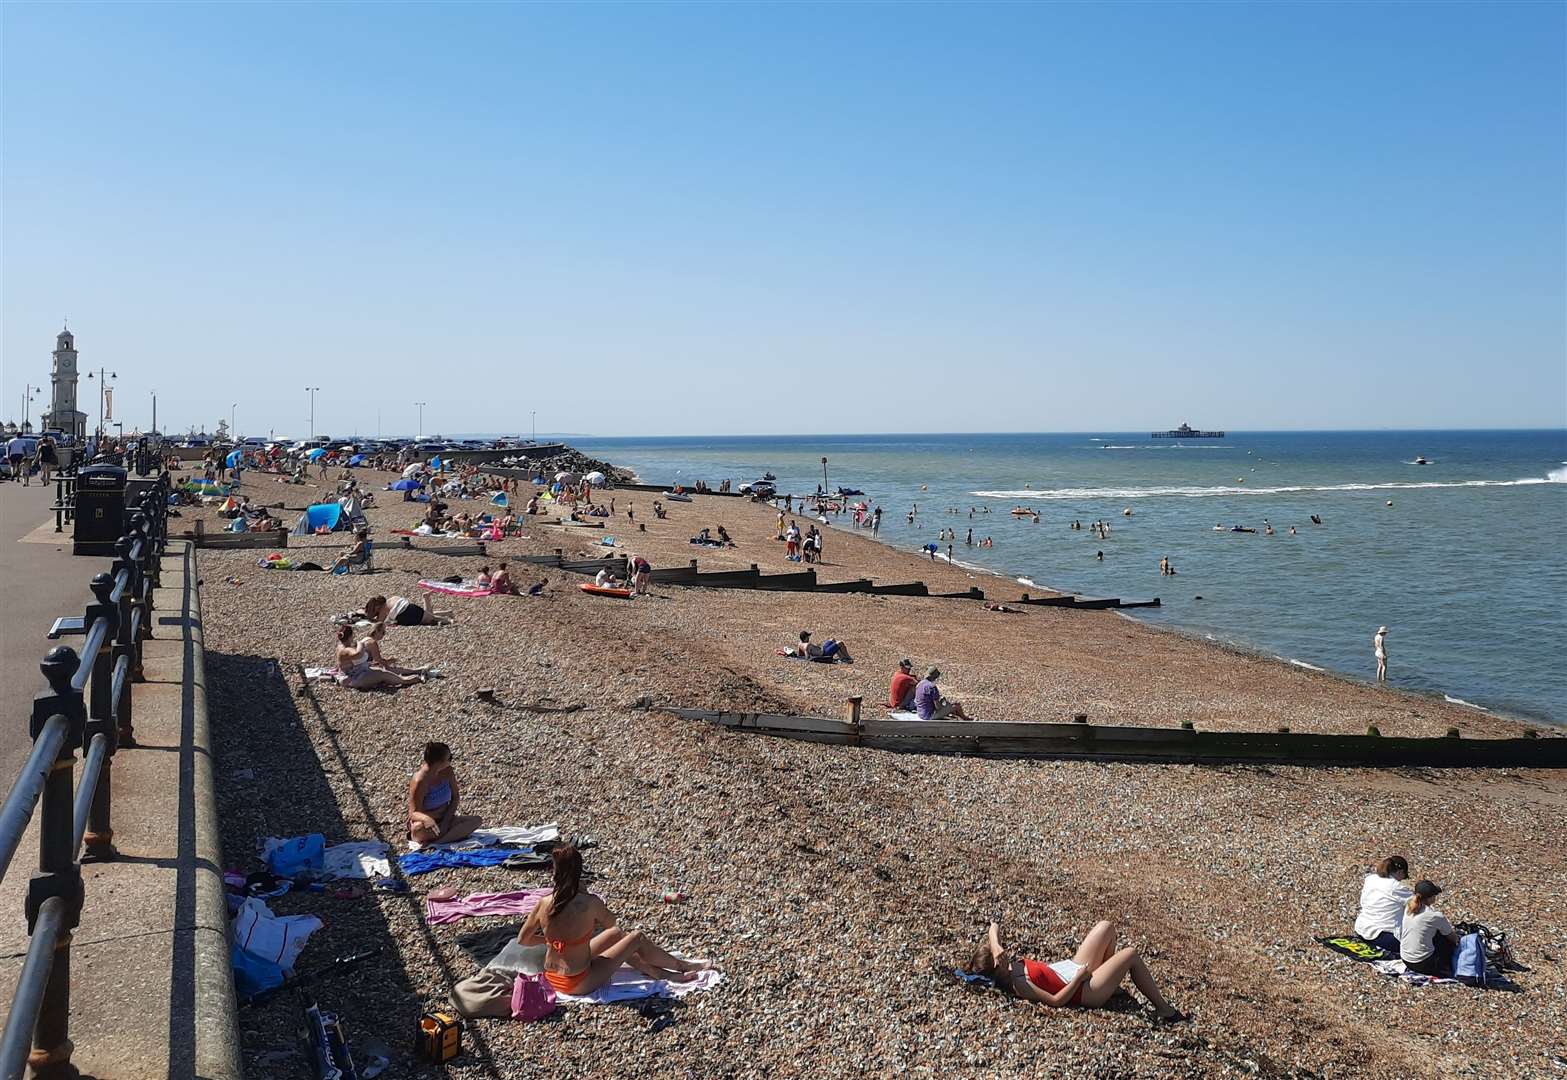 There has been a massive increase in searches for hotels in Herne Bay